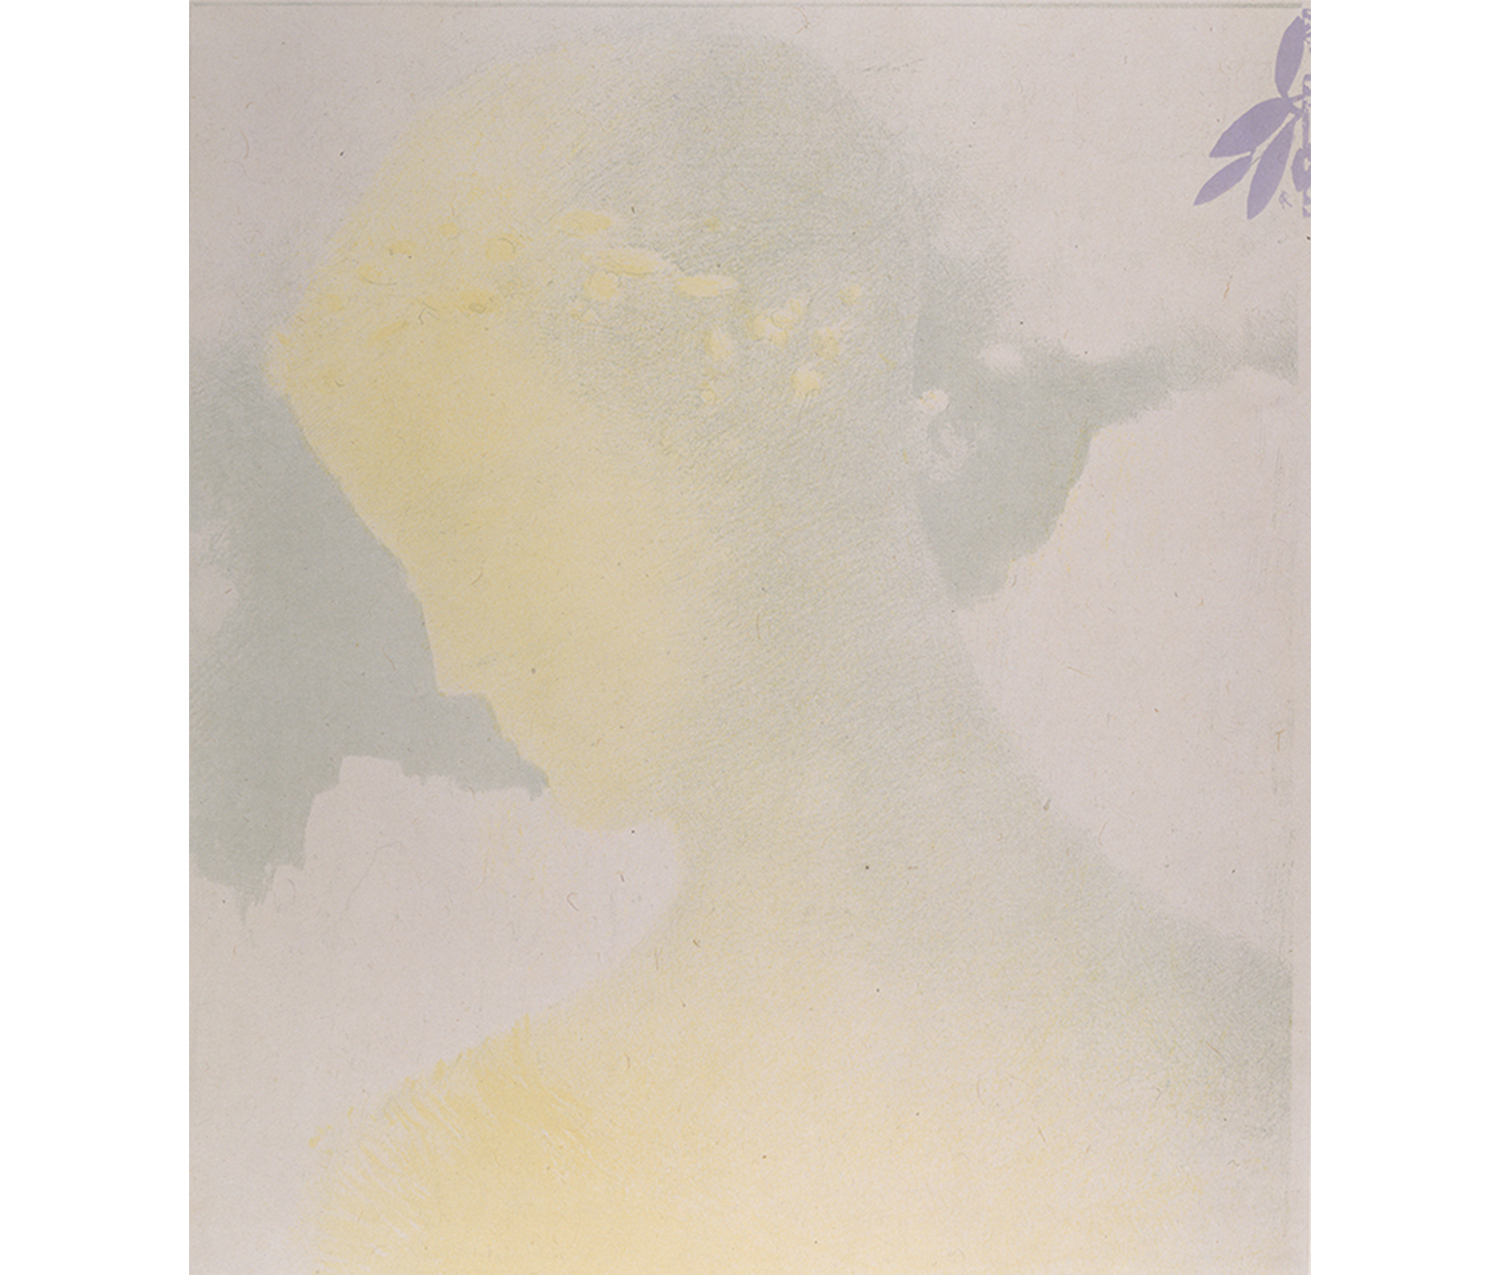 yellow and white silhouette of a woman looking over her shoulder, set against a light blue and white background, with a small purple flower in the top right corner